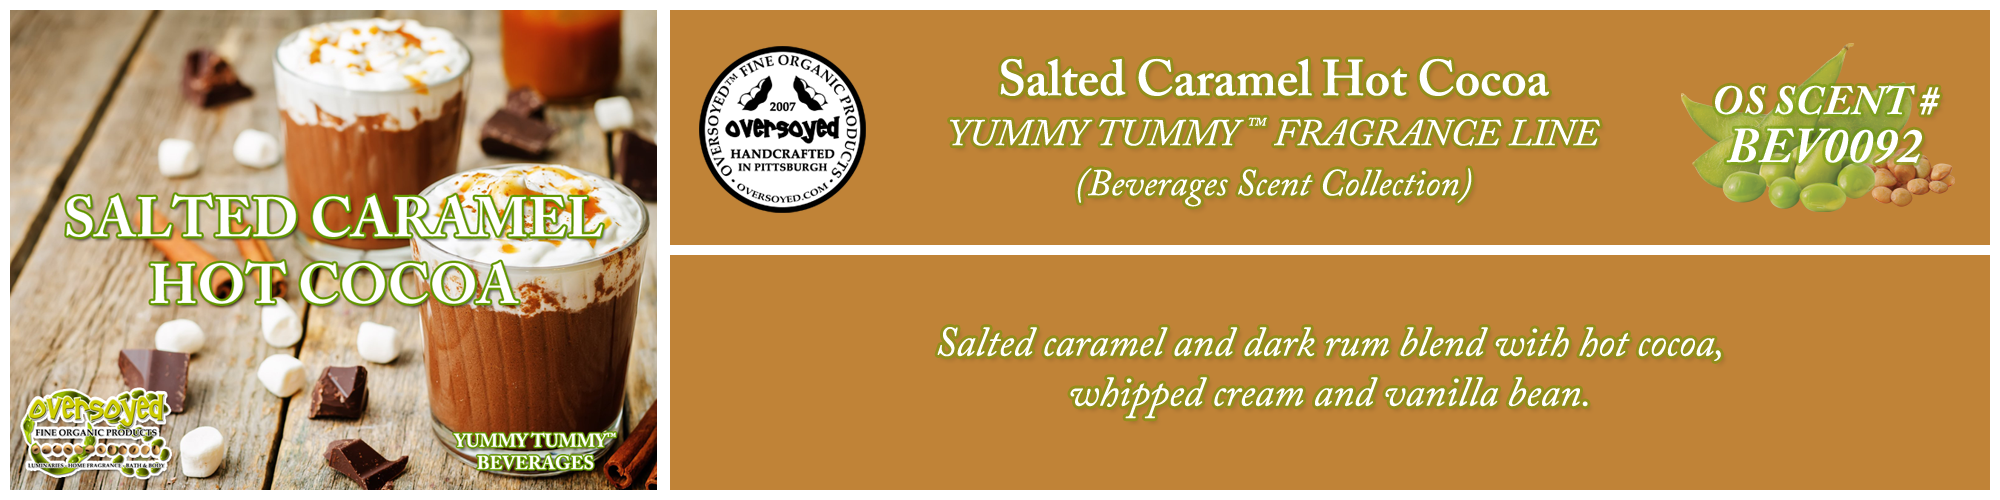 Salted Caramel Hot Cocoa Handcrafted Products Collection